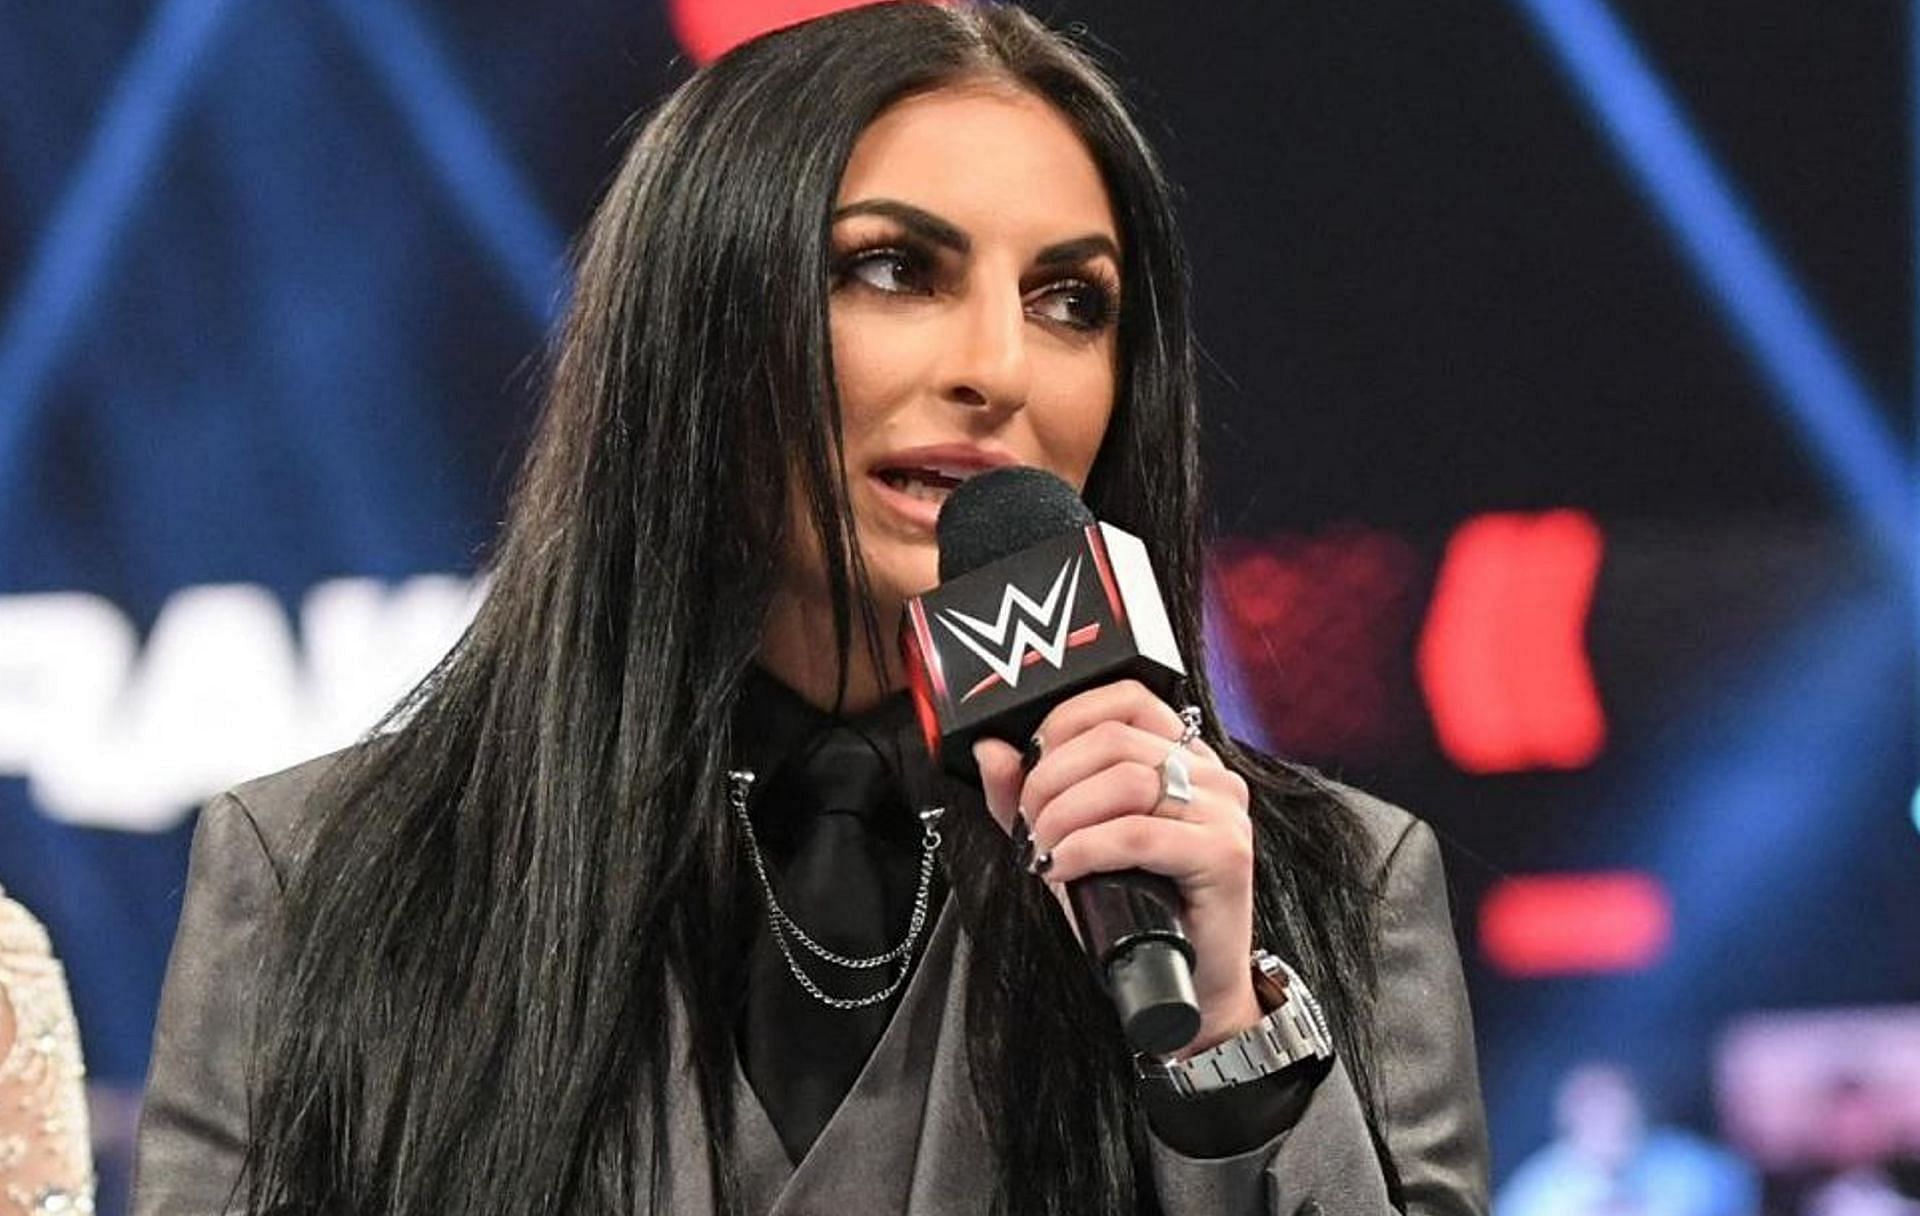 Sonya Deville has been playing the authority figure role to perfection